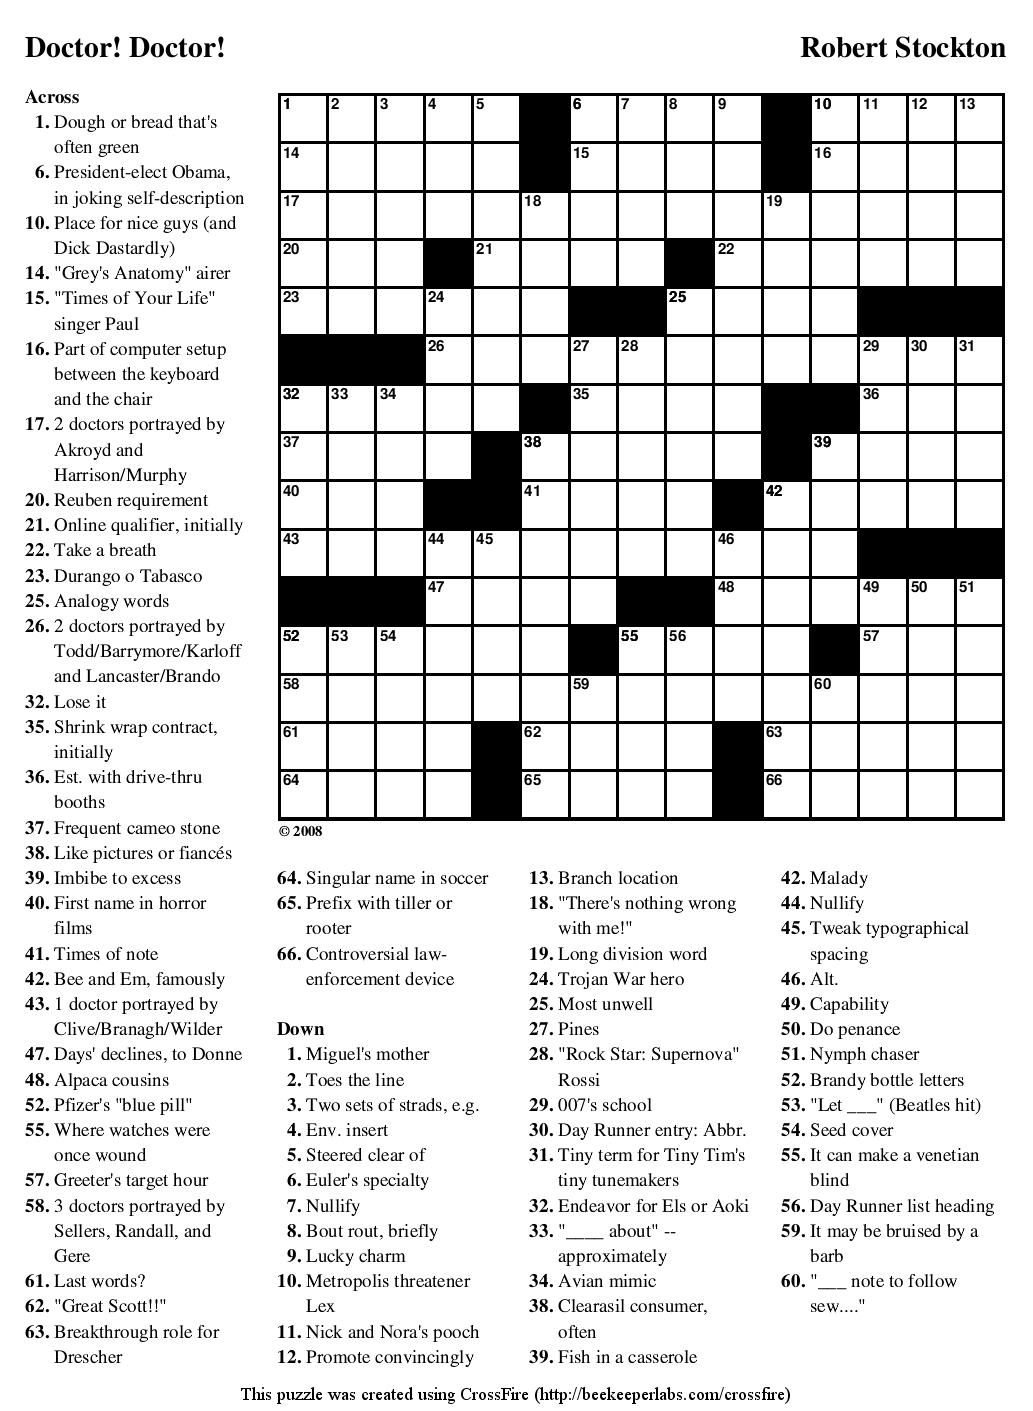 Crossword Puzzles Printable - Yahoo Image Search Results | Crossword - Crossword Puzzle Maker Free Printable 30 Words